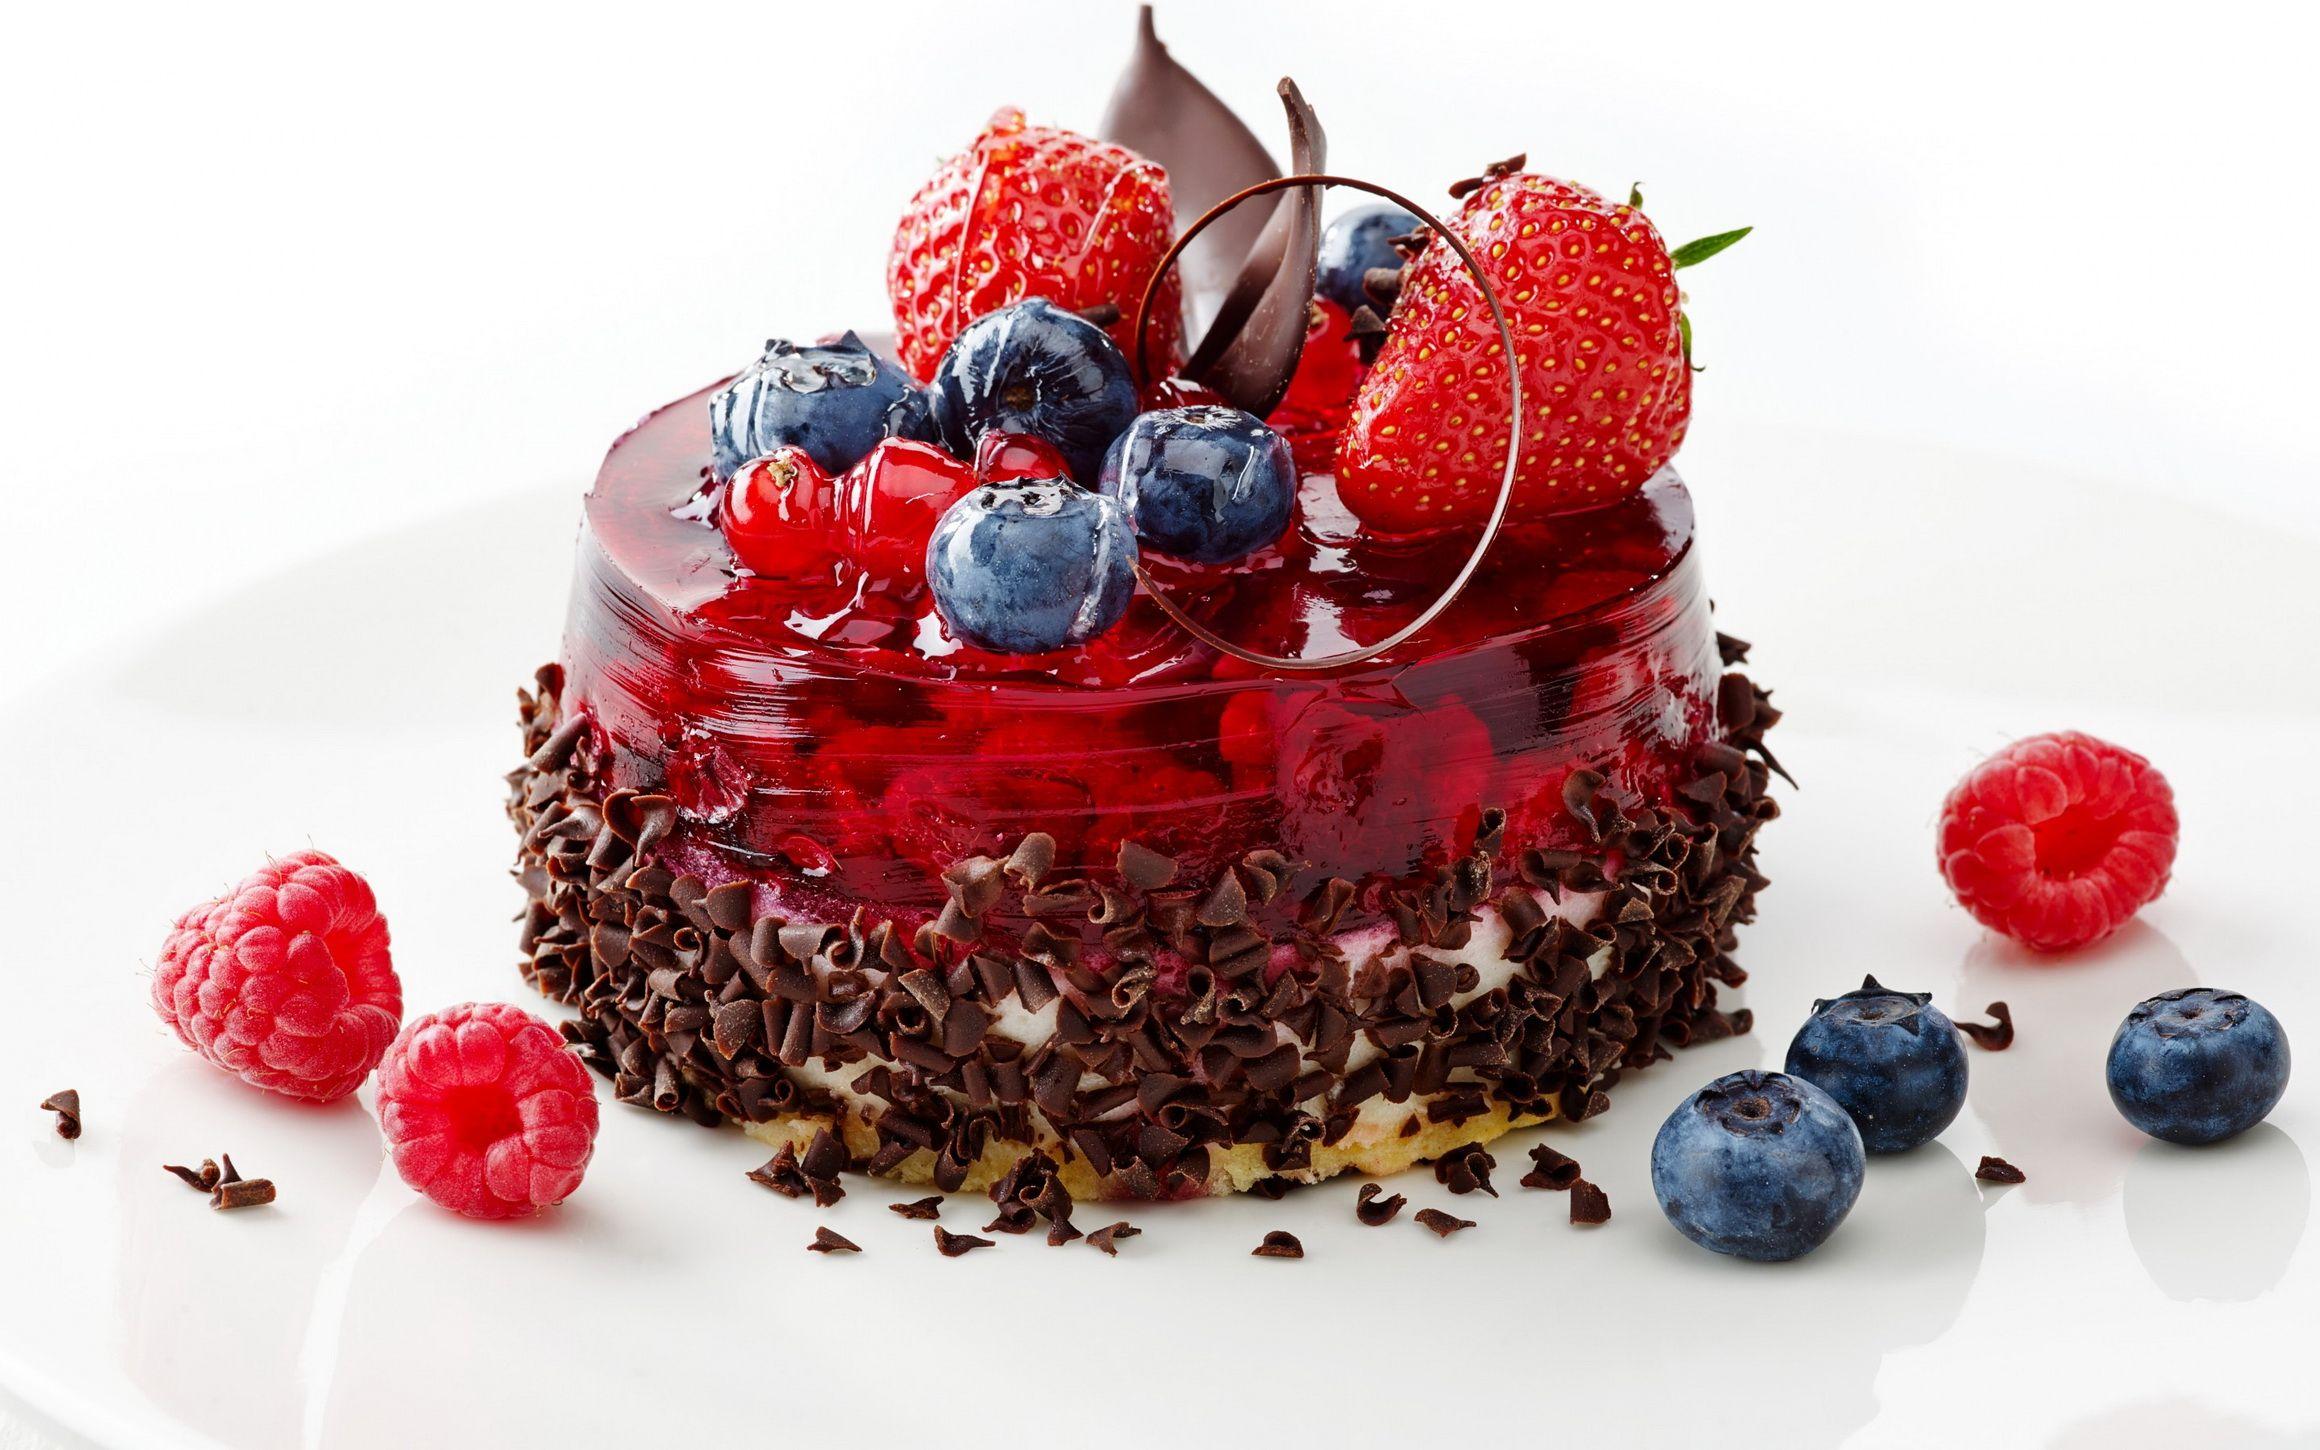 Cake full hd hdtv fhd 1080p wallpapers hd desktop backgrounds 1920x1080  downloads images and pictures